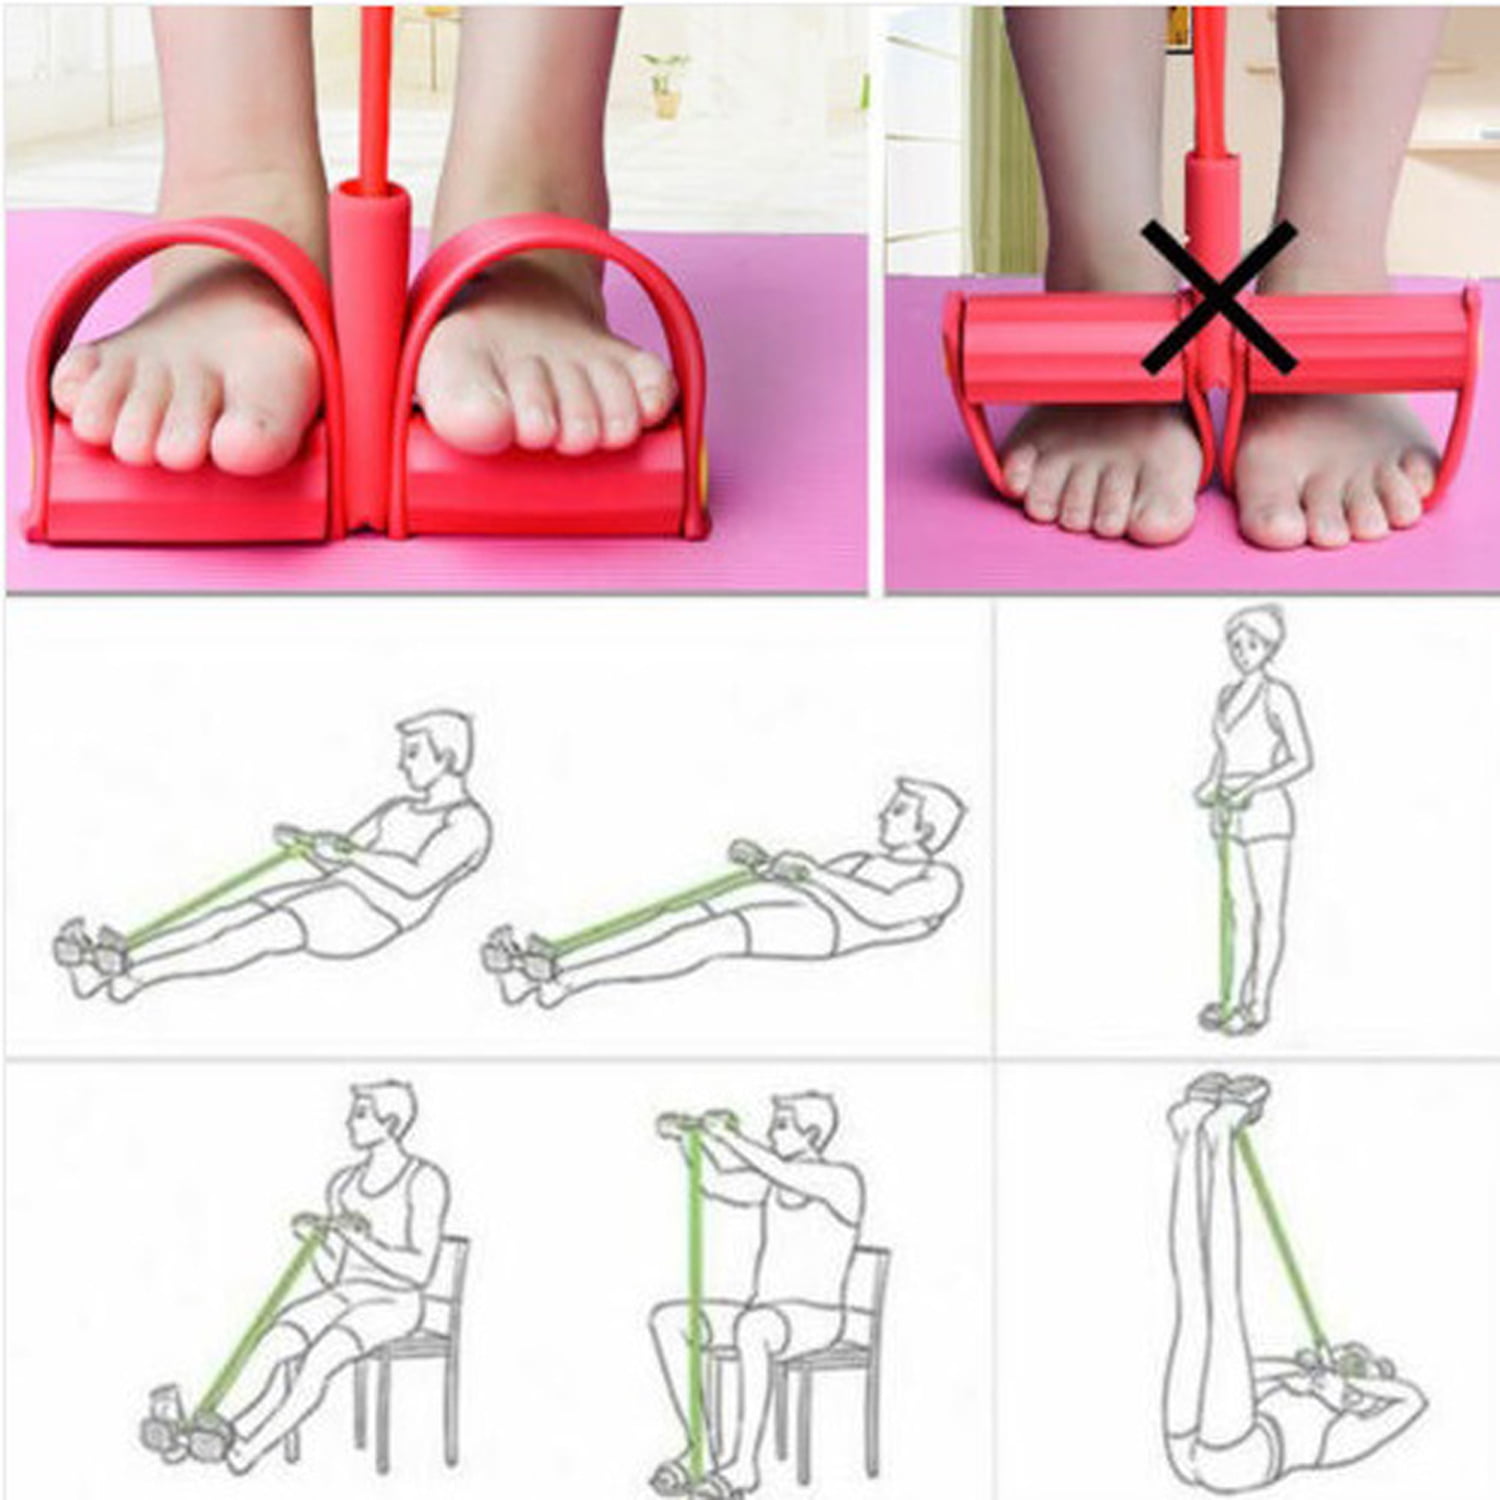 2 Tubes/ 4 Tubes sf-world Foam Foot Pedal Arm Tummy Stretching Pull-up Exerciser Slimming Body Shaper Sit-up Exerciser Gut Buster 